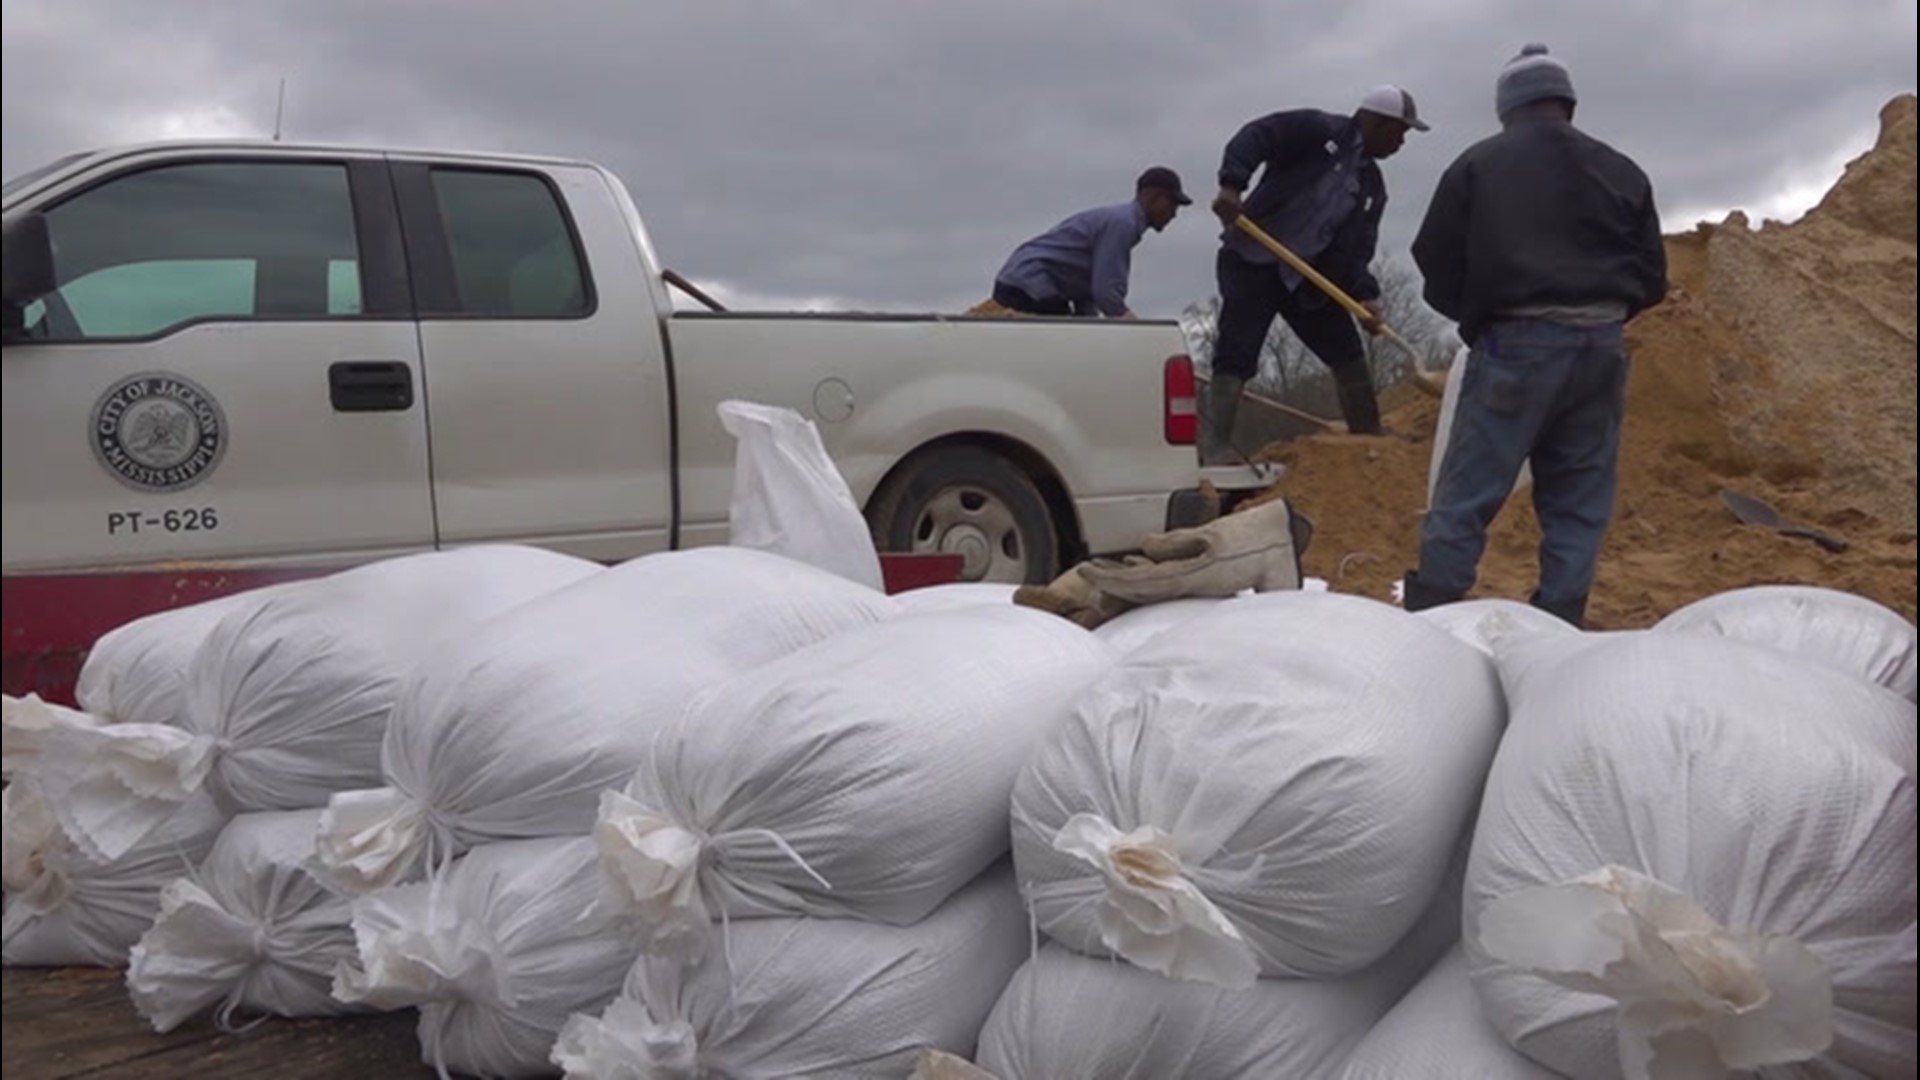 Residents of Jackson, Mississippi, are busy filling sandbags and trying to protect homes, businesses and churches from flooding expected this weekend.